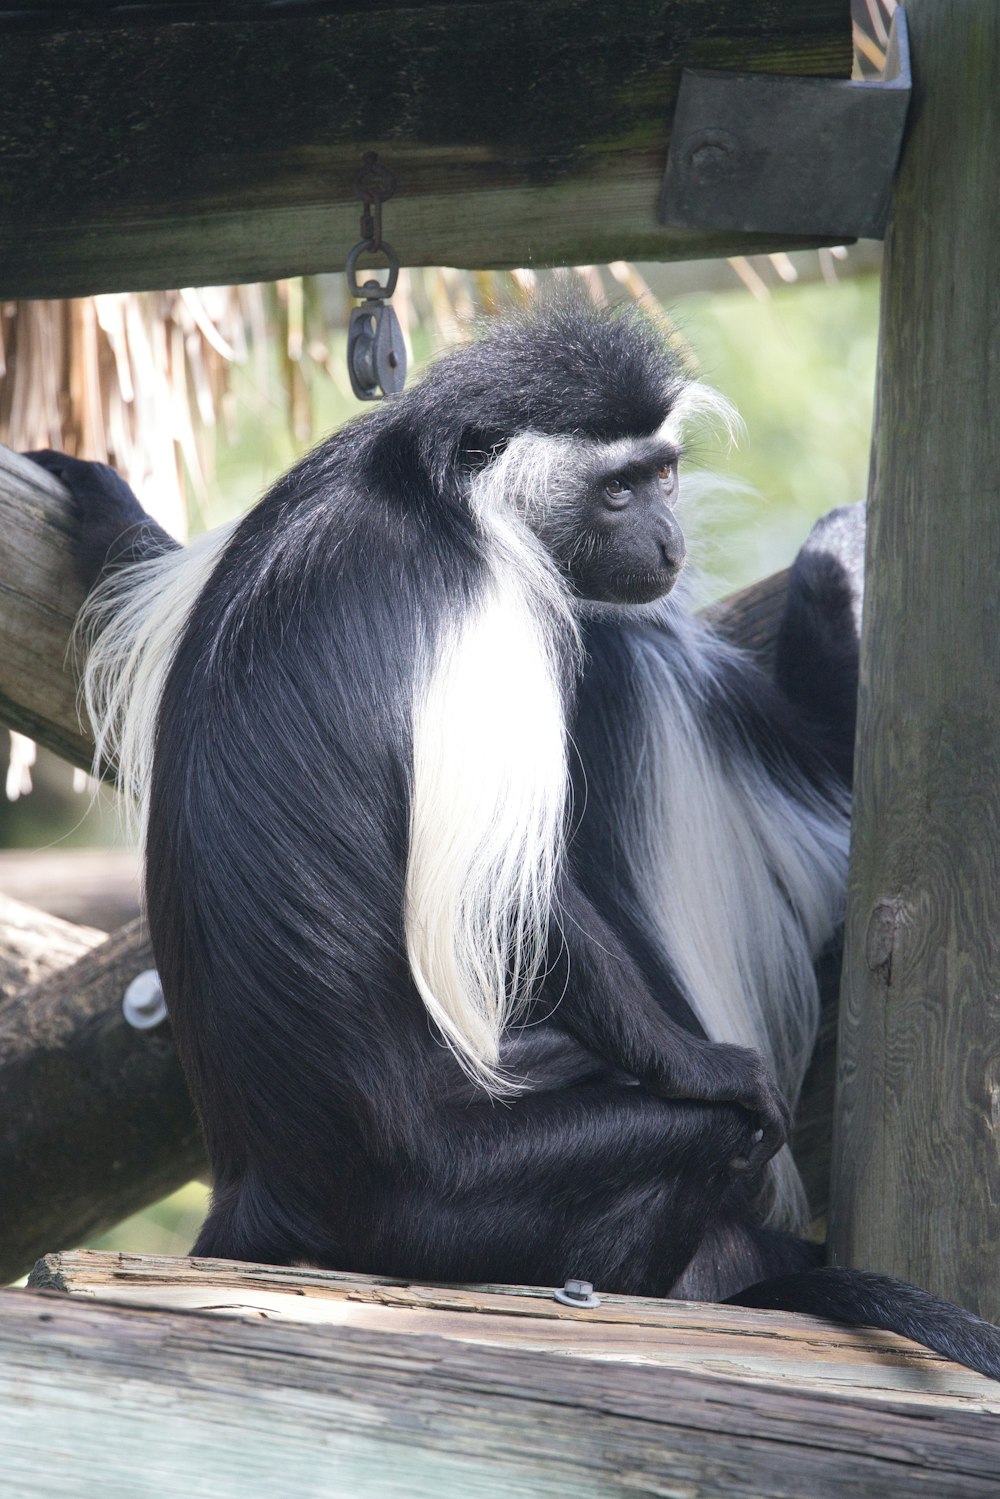 a black and white monkey sitting on top of a wooden platform